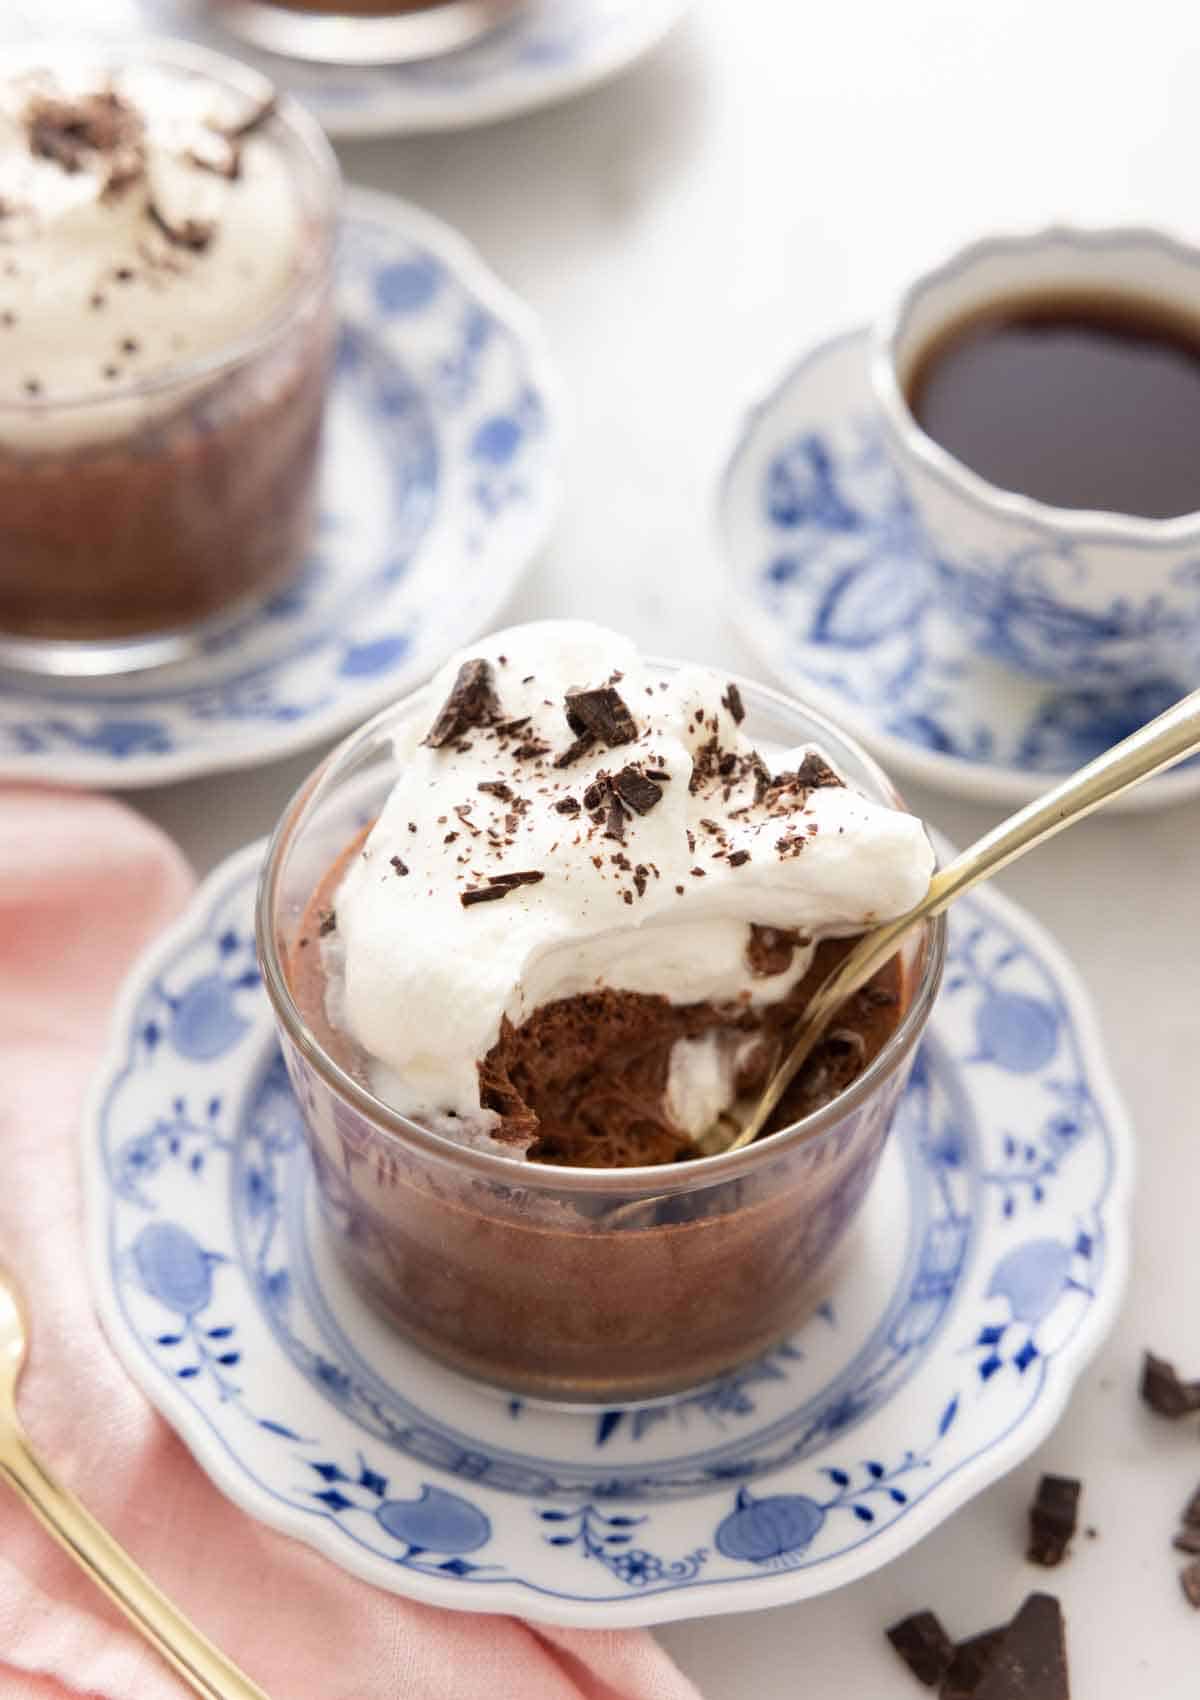 A glass of chocolate mousse with whipped cream and shaved chocolate with a spoonful eaten and a spoon inside.